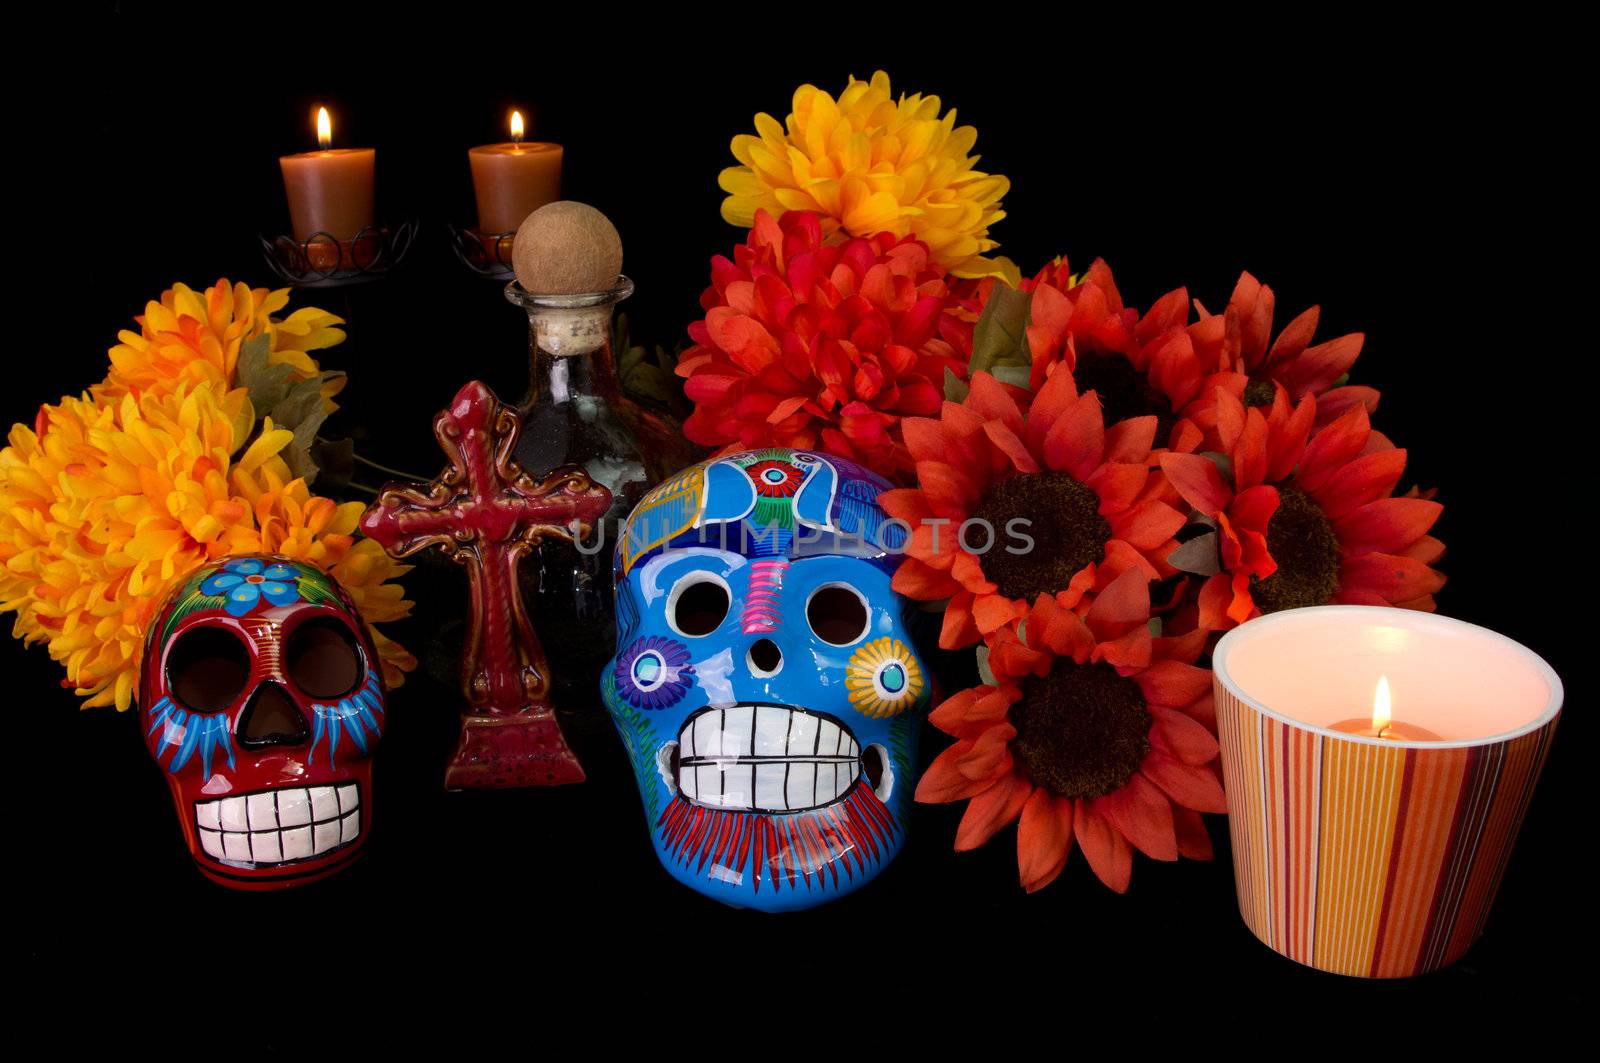 Dia De Los Muertos (Day of the Dead) Alter with decorated sugar skulls, marigold flowers, candles, and cross. Traditional Mexican offering to loved ones